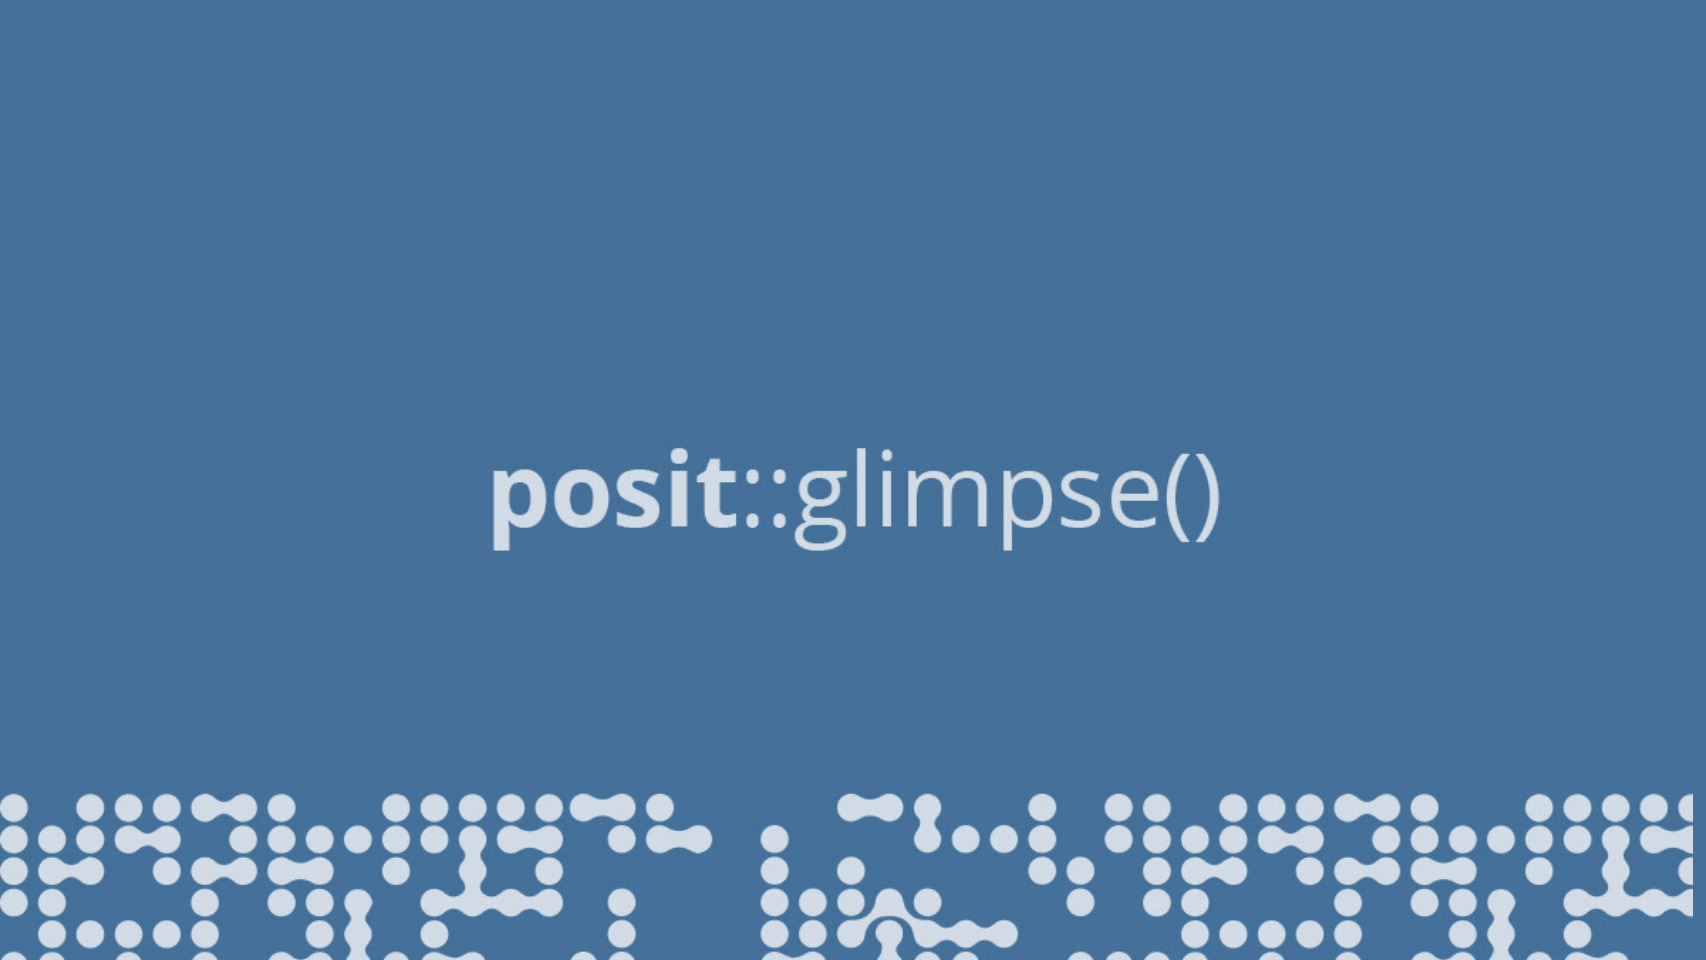 posit glimpse newsletter image, with blue data dots